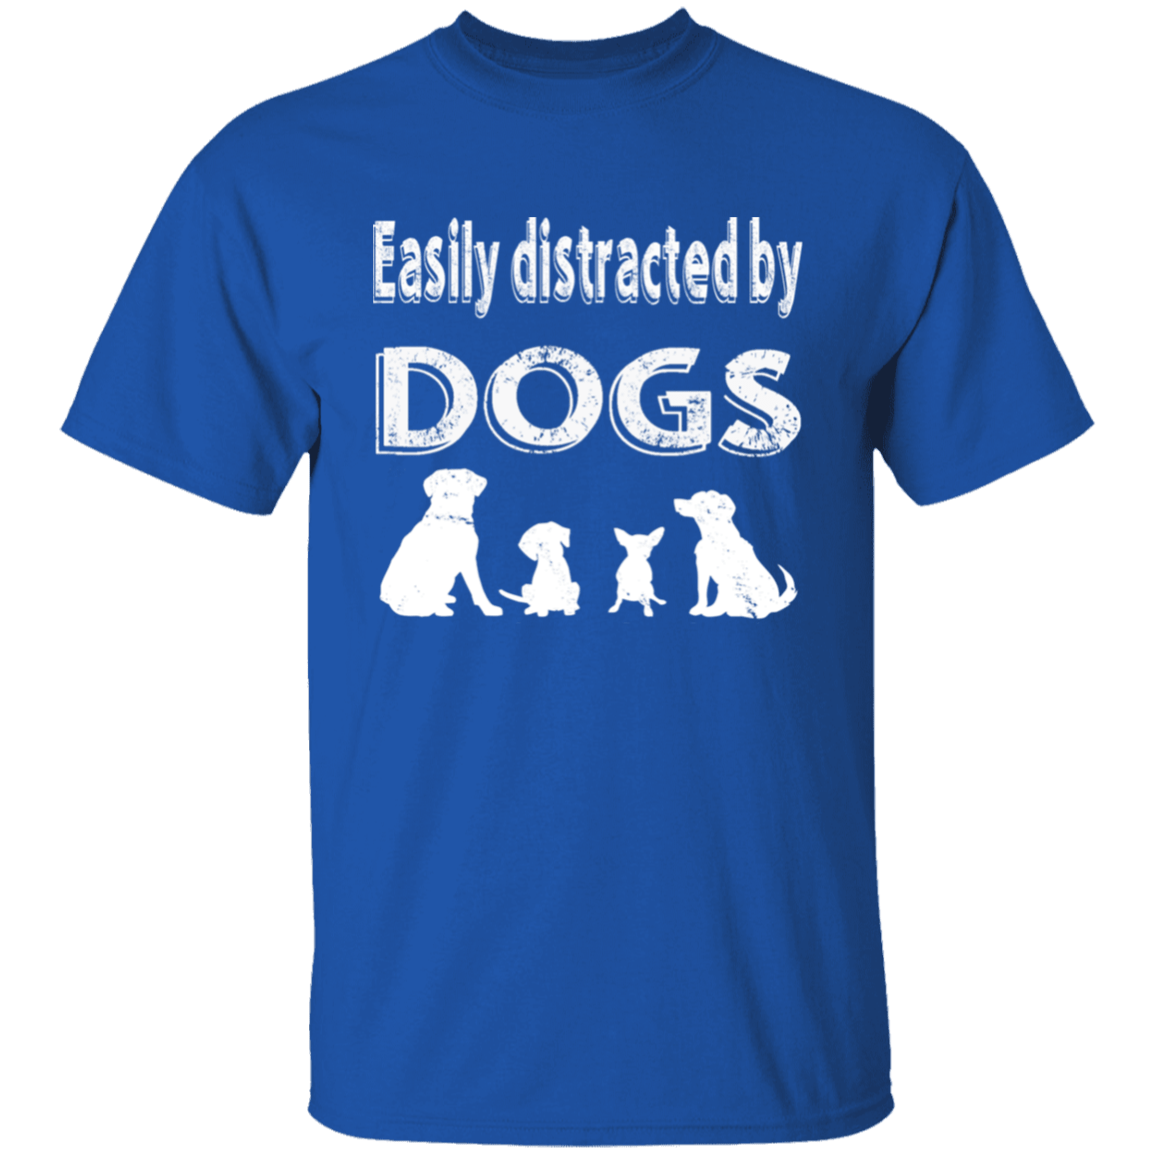 Easily Distracted By Dogs - T Shirt.